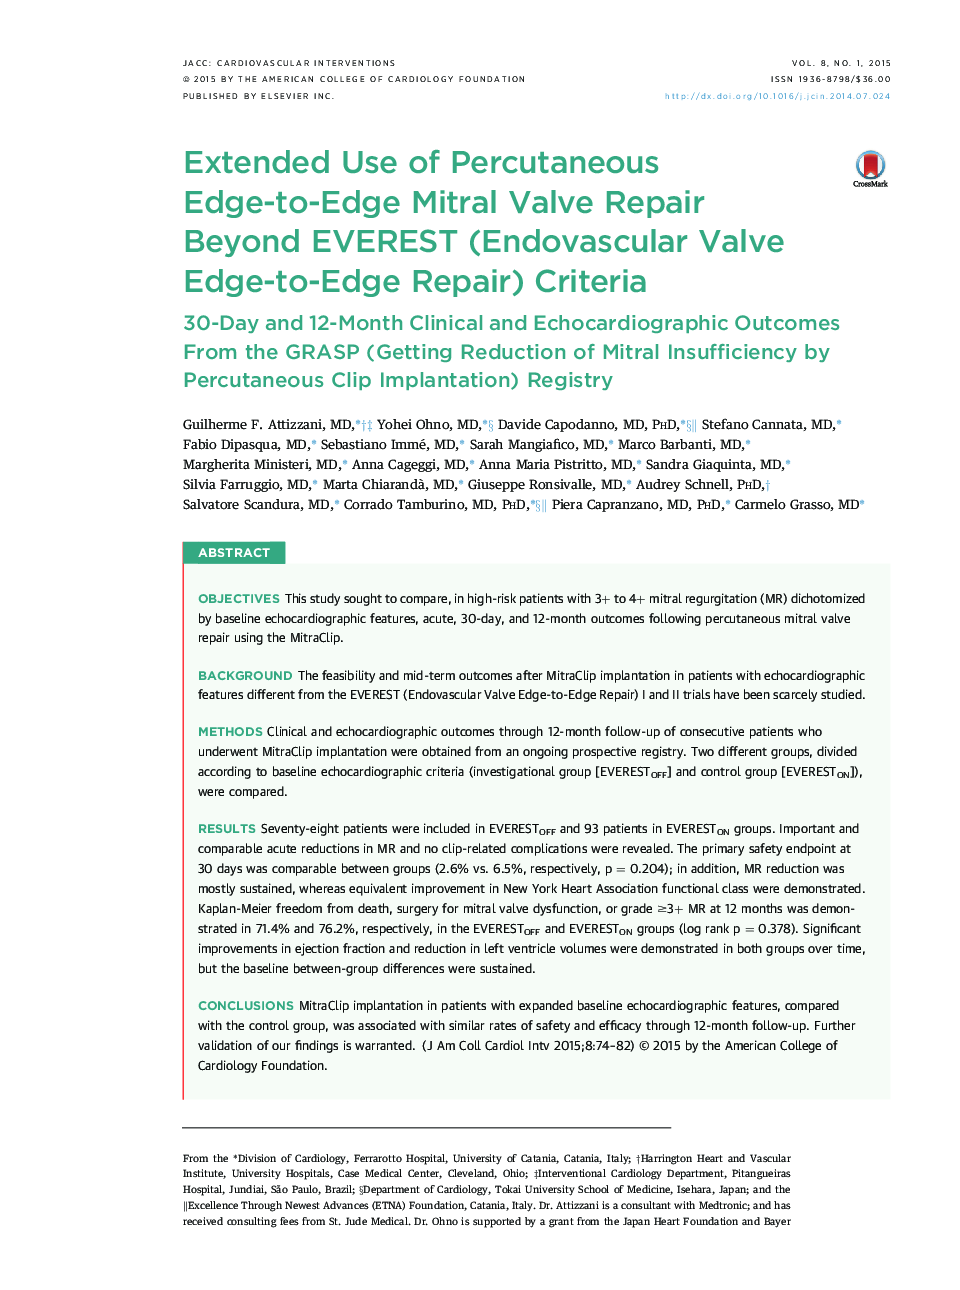 Extended Use of Percutaneous Edge-to-Edge Mitral Valve Repair BeyondÂ EVEREST (Endovascular Valve Edge-to-Edge Repair) Criteria: 30-Day and 12-Month Clinical and Echocardiographic Outcomes From the GRASP (Getting Reduction of Mitral Insufficiency by Percu